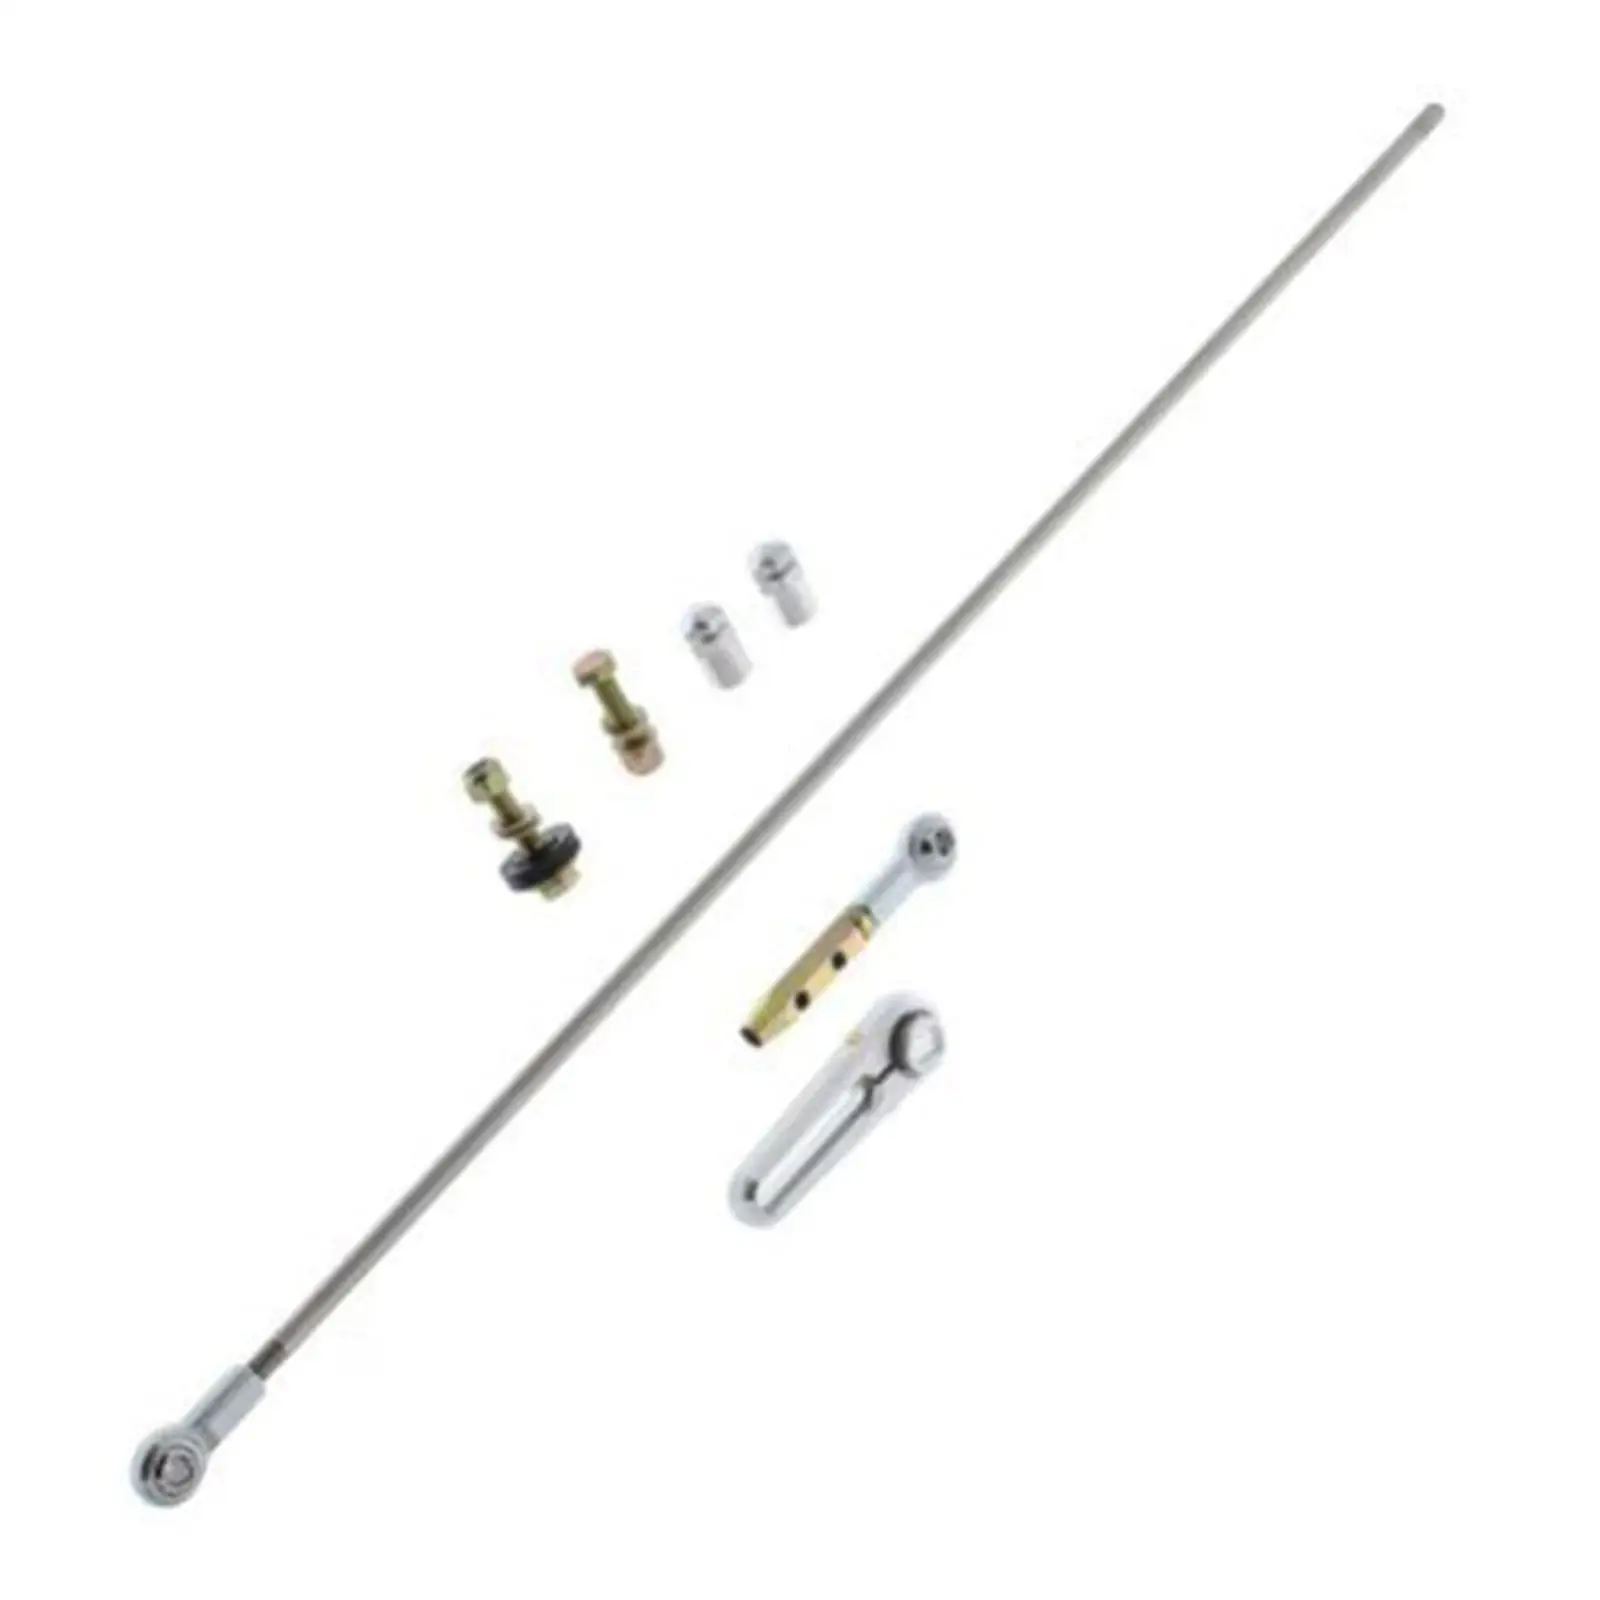 Transmission Shift Linkage Kit Wear Resistance Replacement for GM 700R4